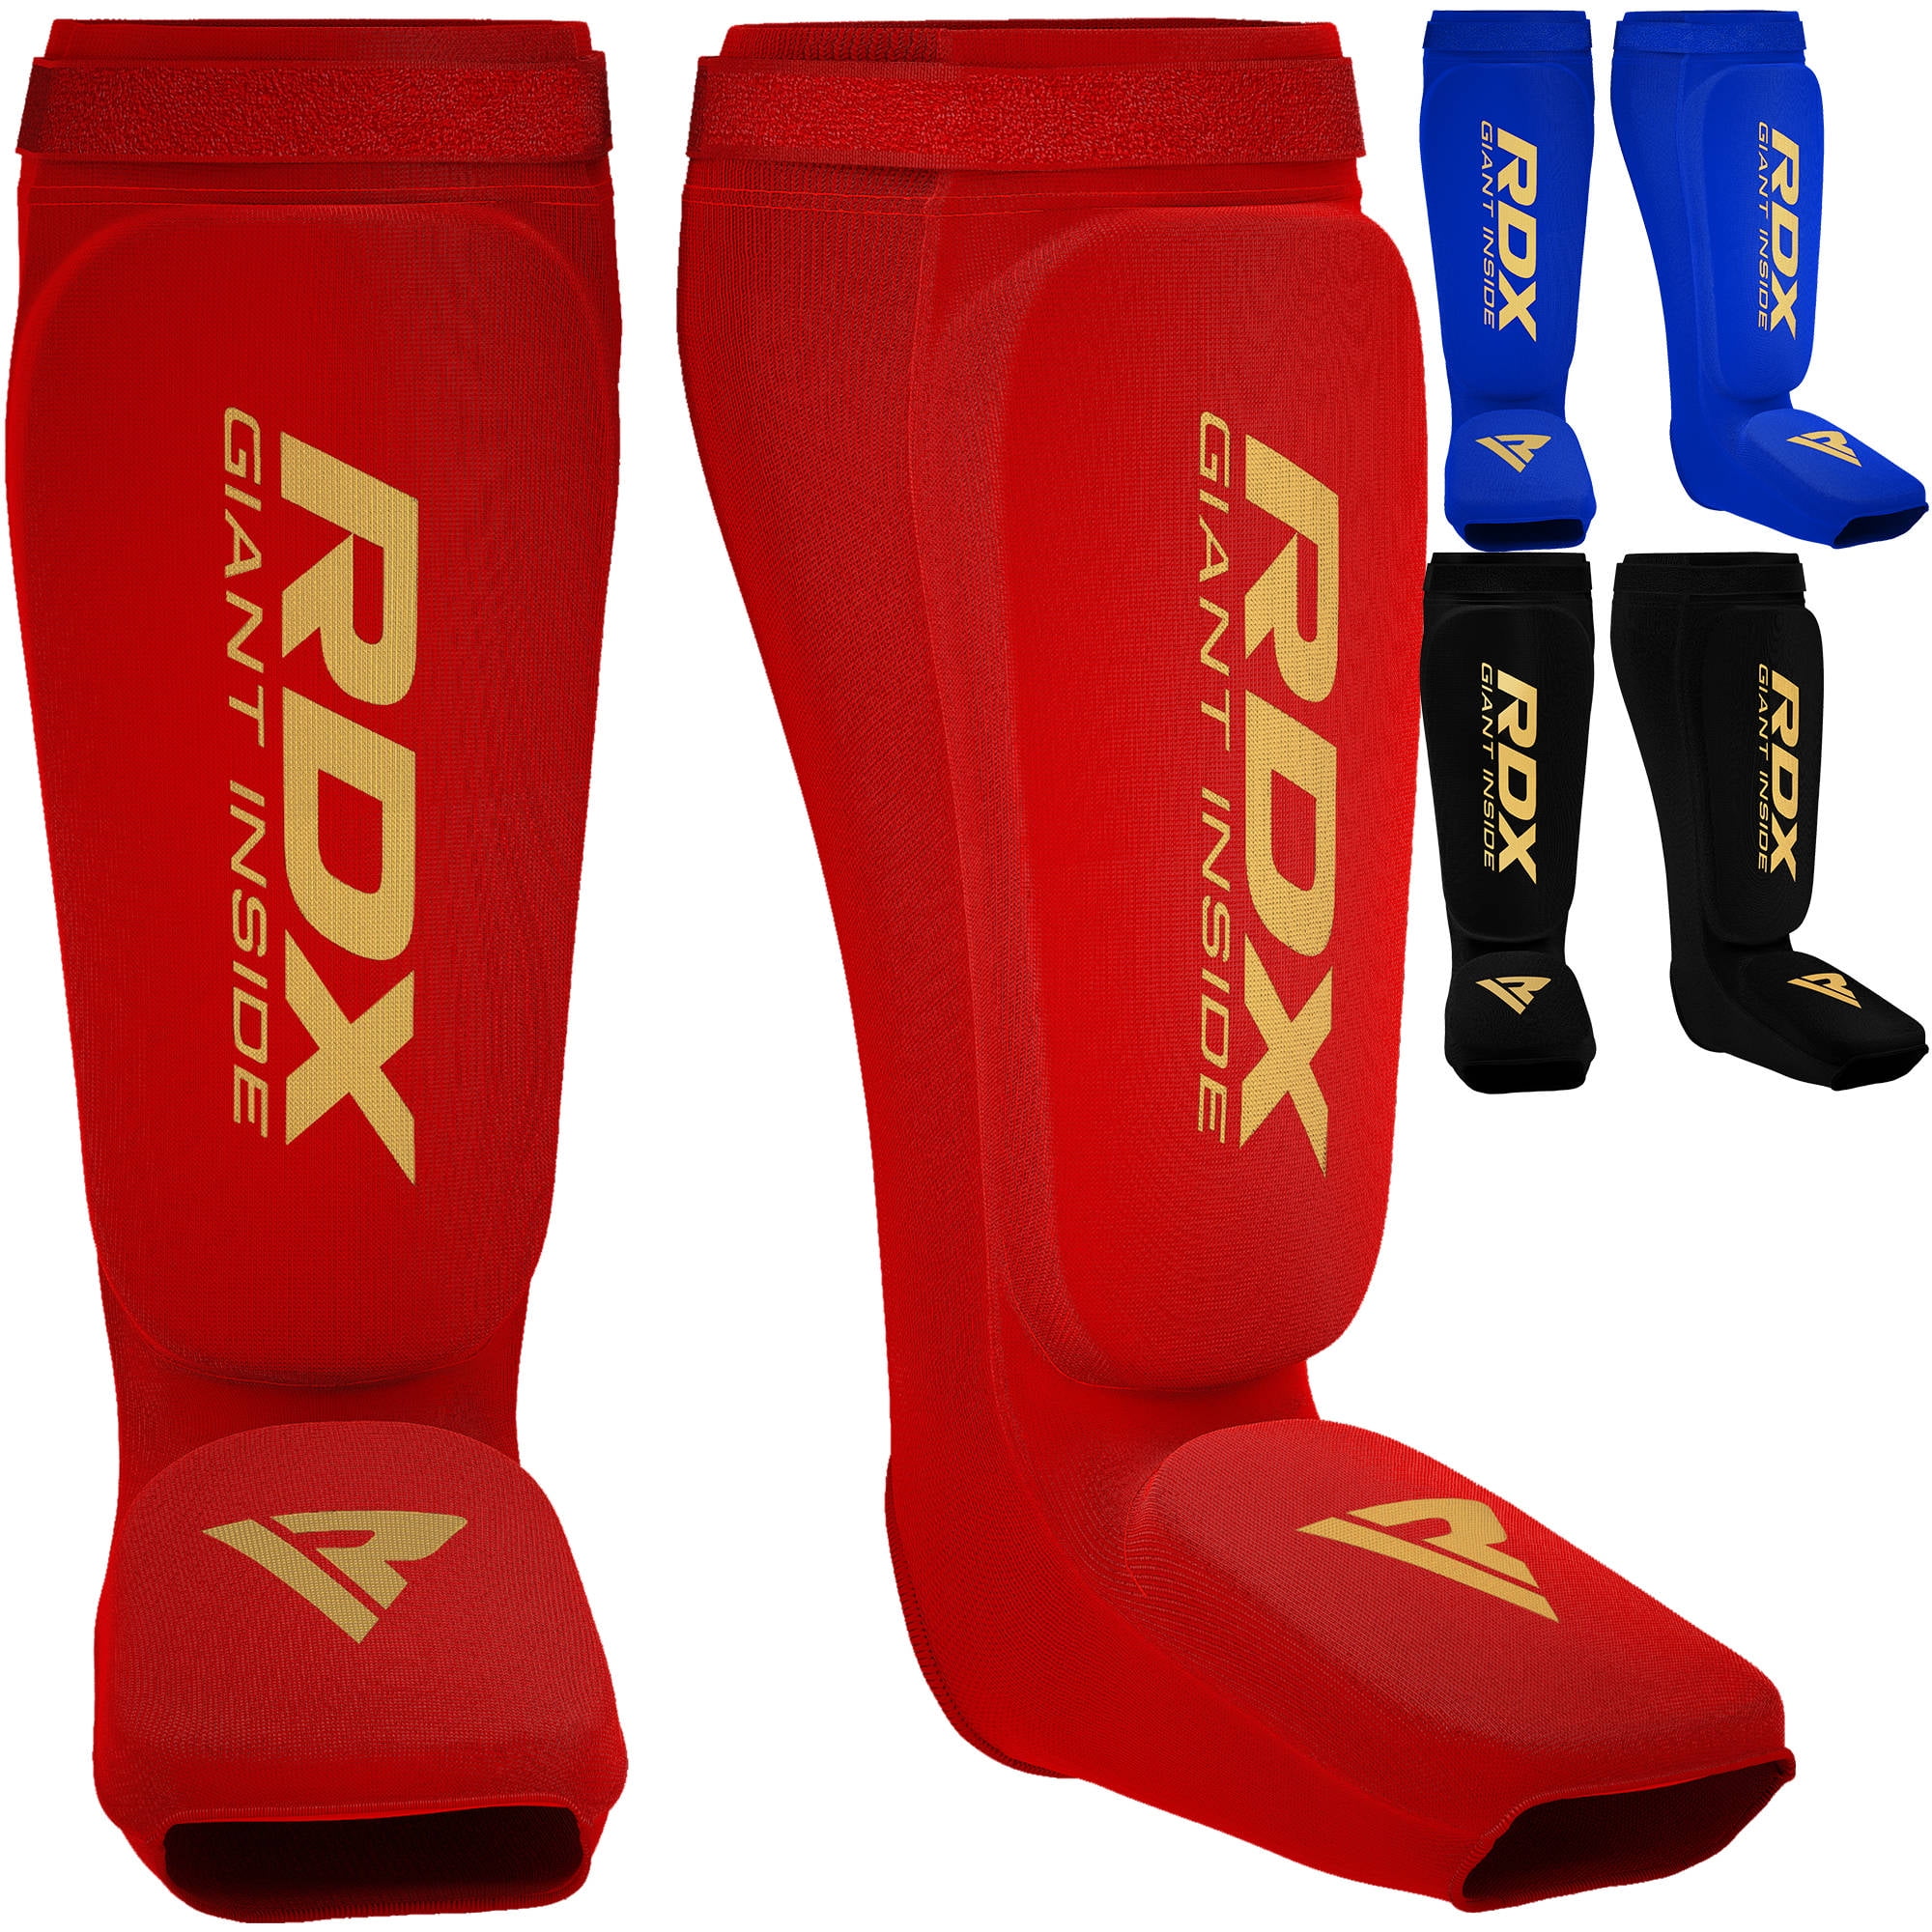 XL 4Fit Shin Instep Protectors Muay Thai RED S,M MMA Guards Pads Boxing L 